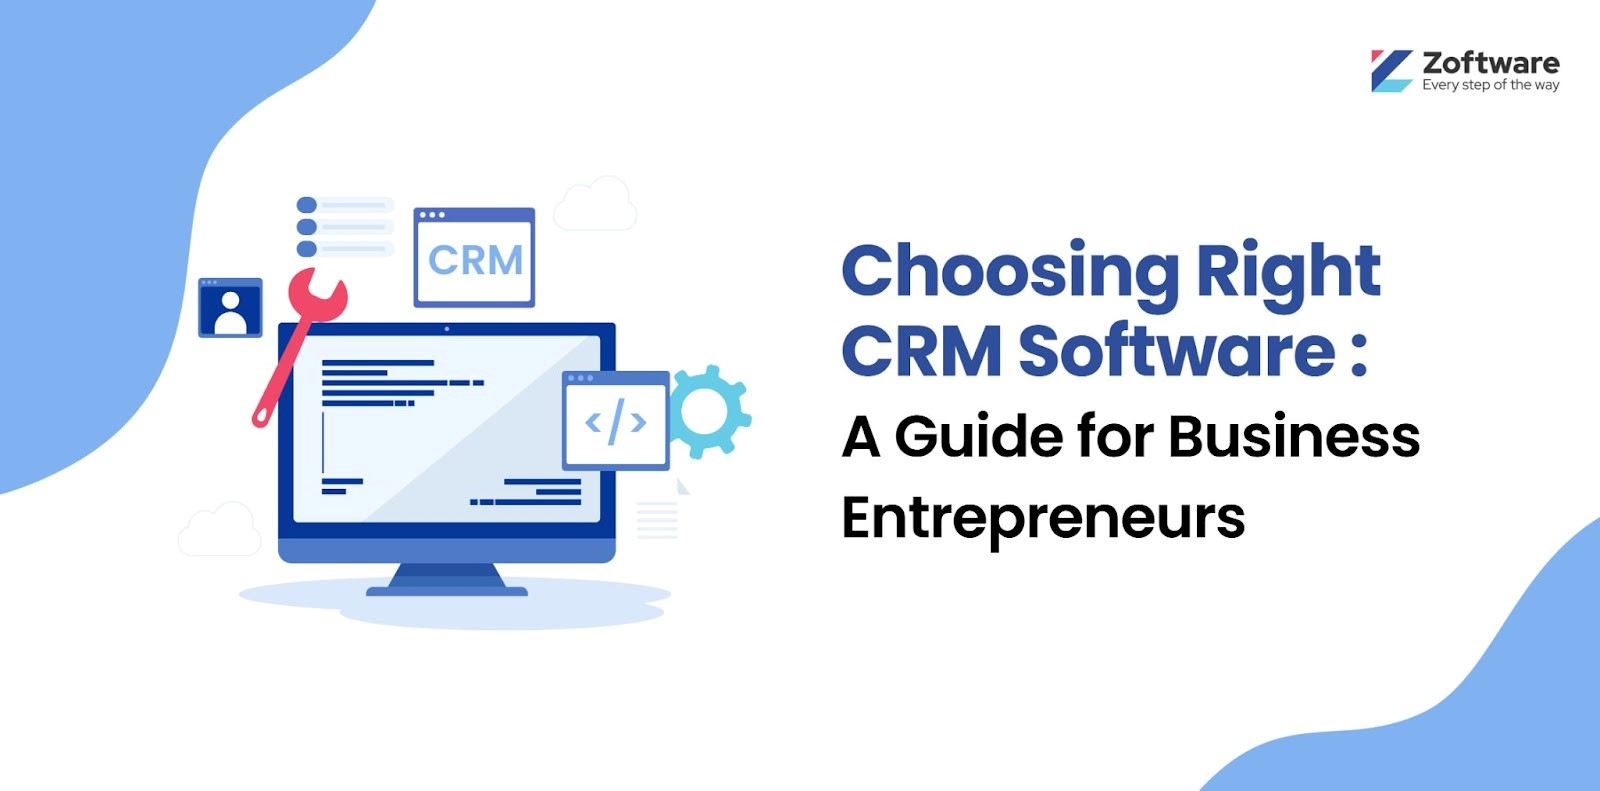 How to Choose the Right CRM Software for Your Business